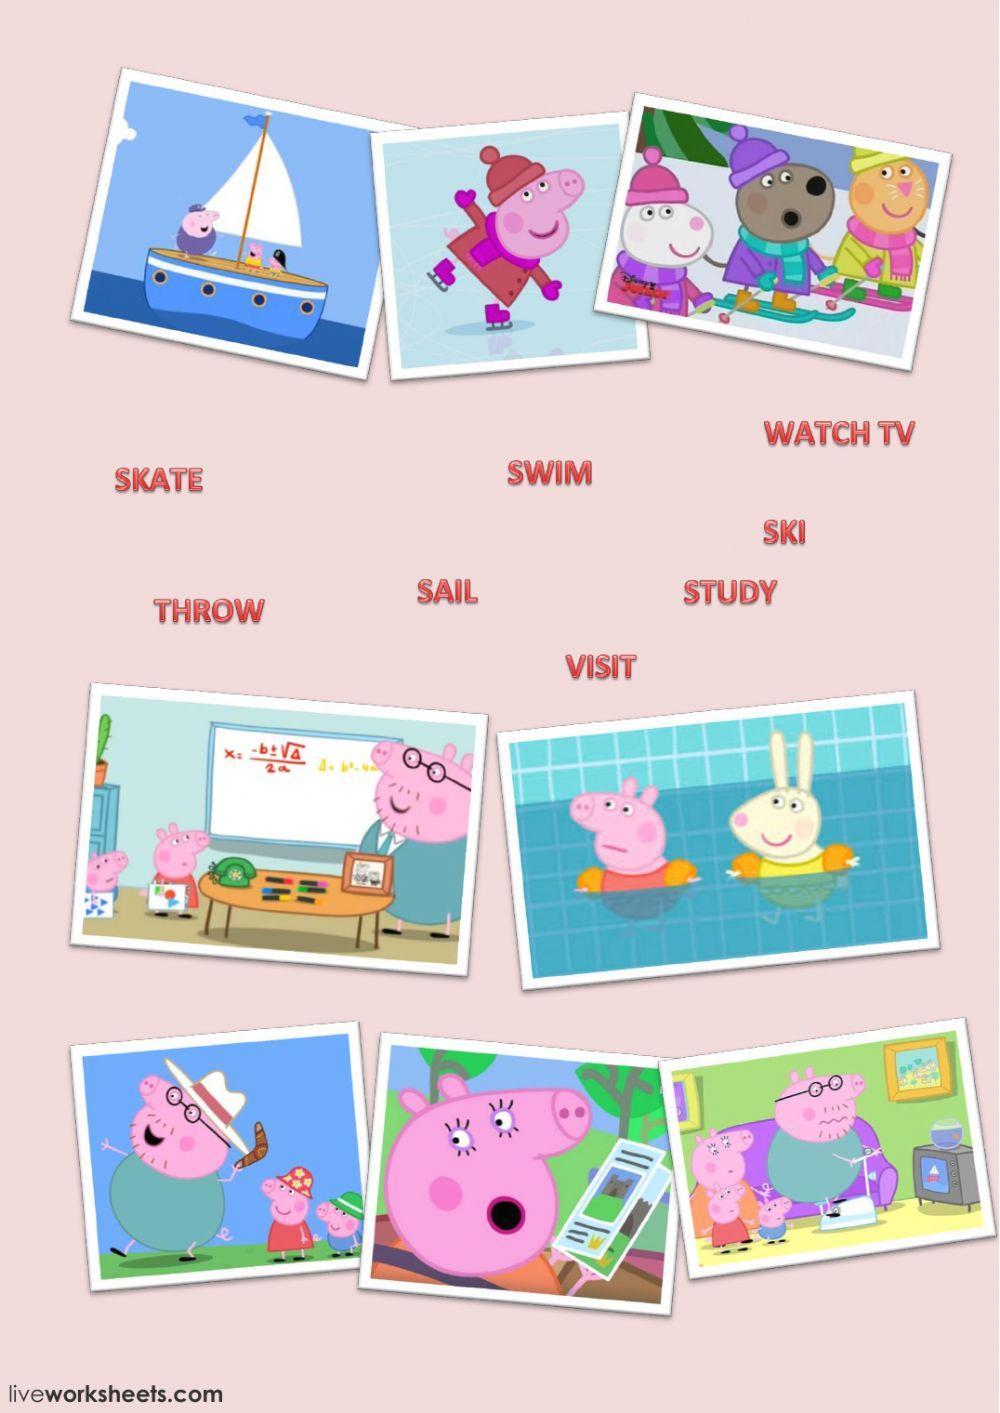 Learn YourVerbs With Peppa Pig-Match